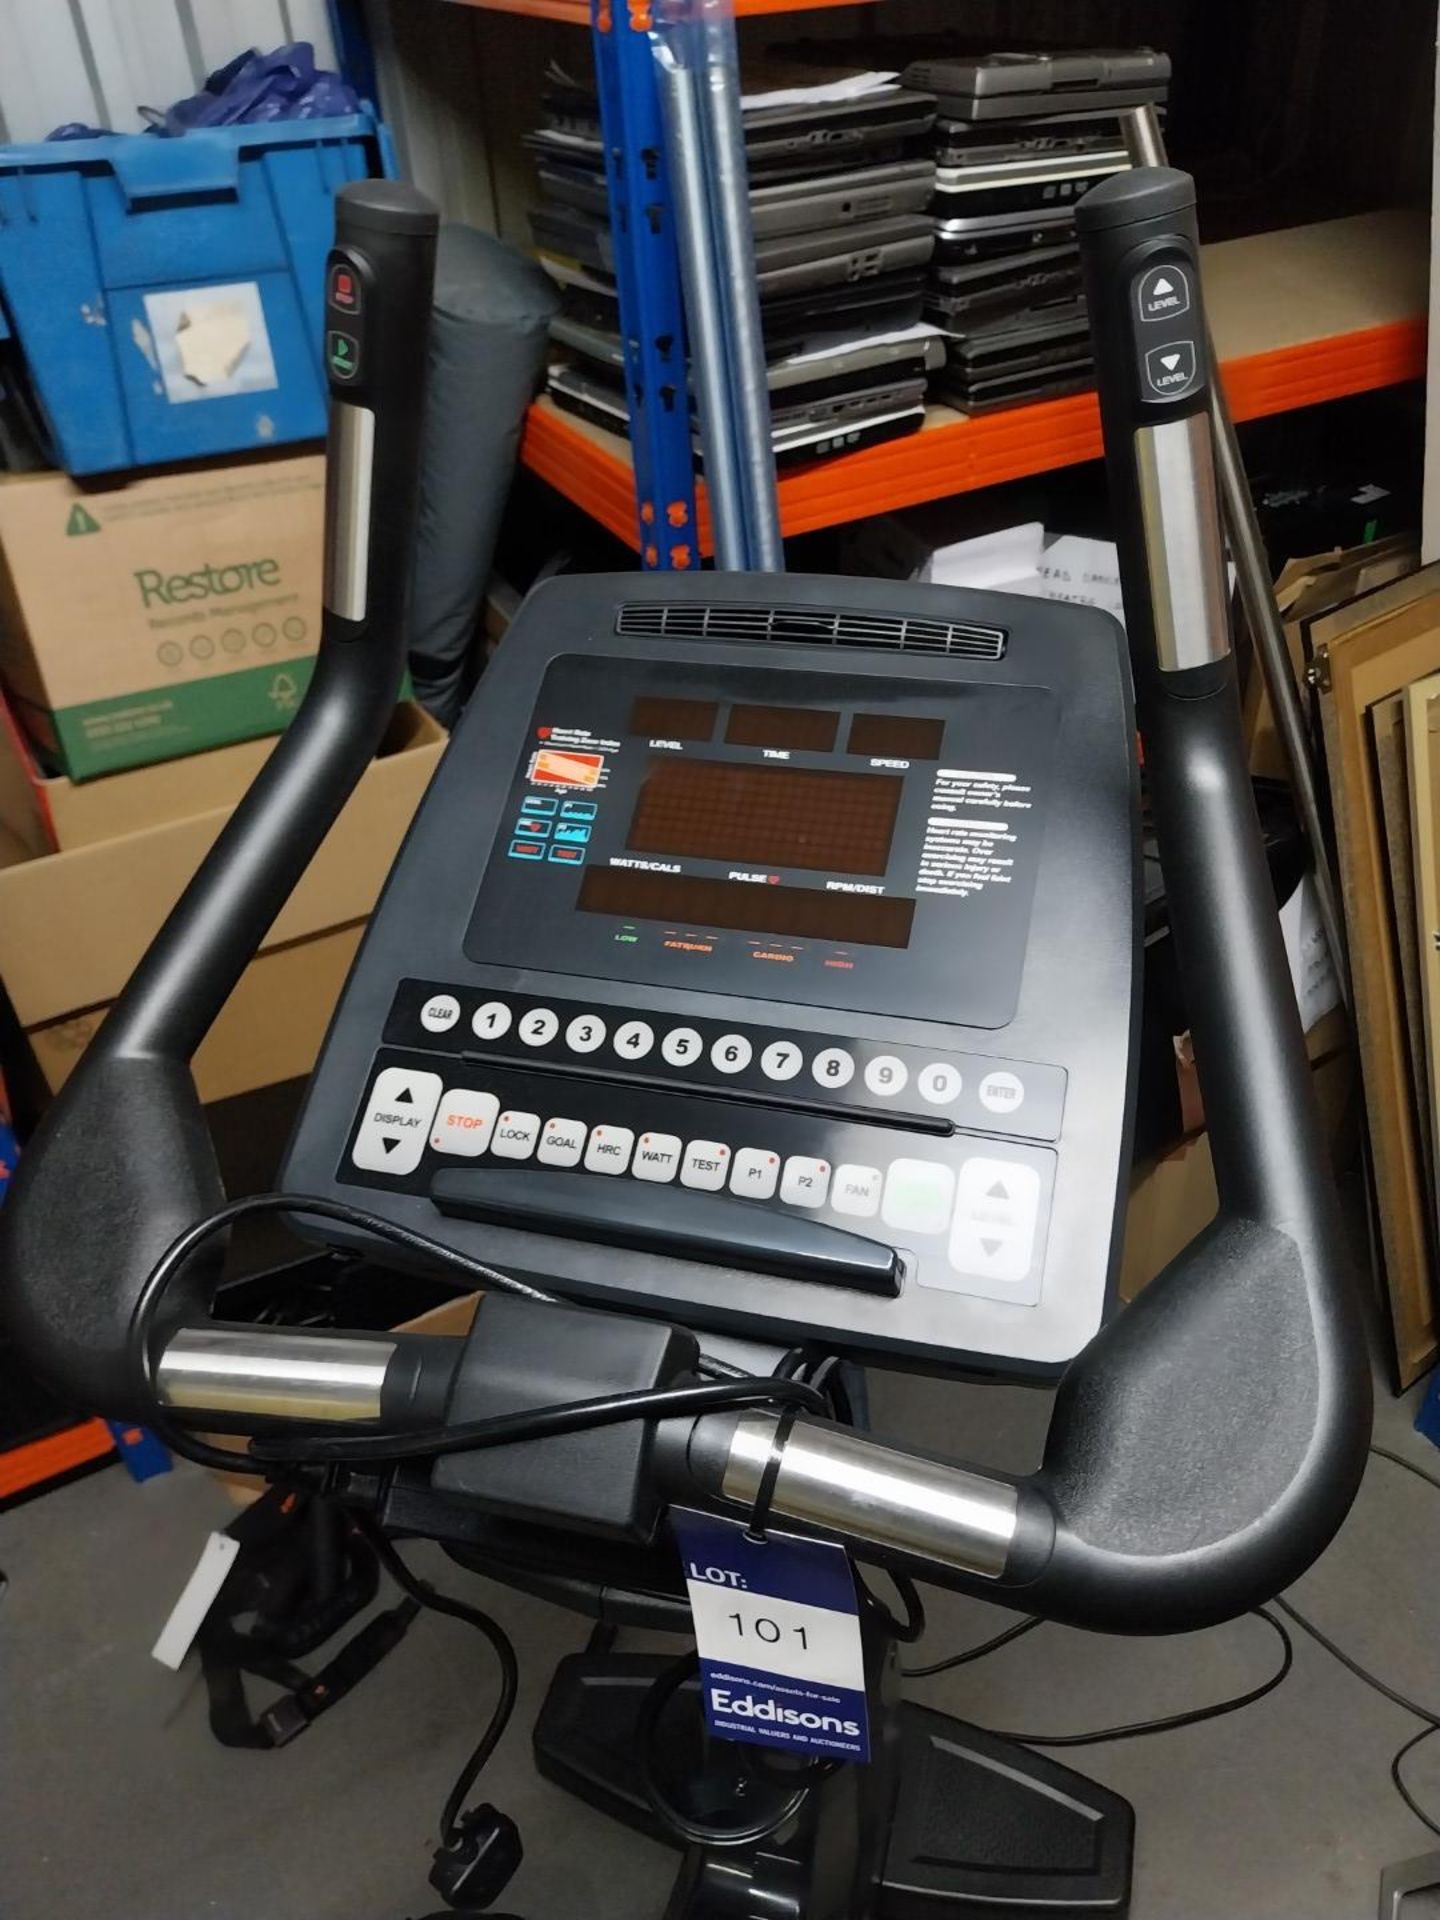 Inspace Fitness LCB22.1 Exercise Bike (located in Leeds) - Image 4 of 5